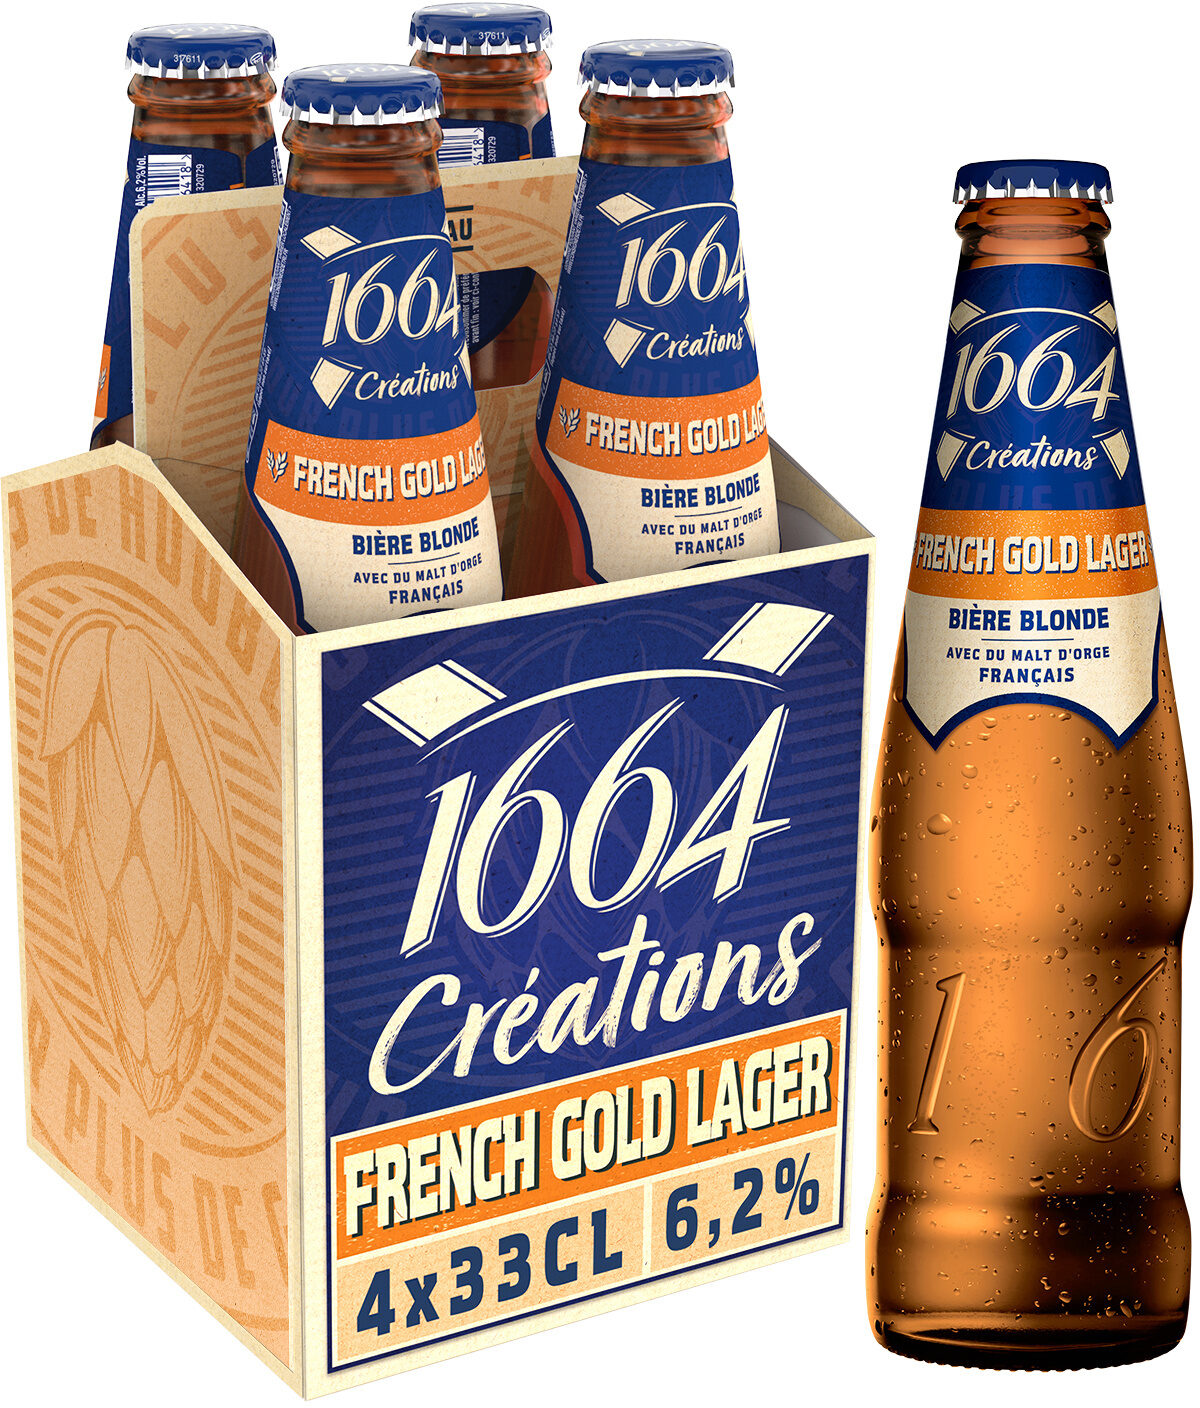 1664 4x33cl 1664 creations french gold 6.2 degre alcool - Product - fr